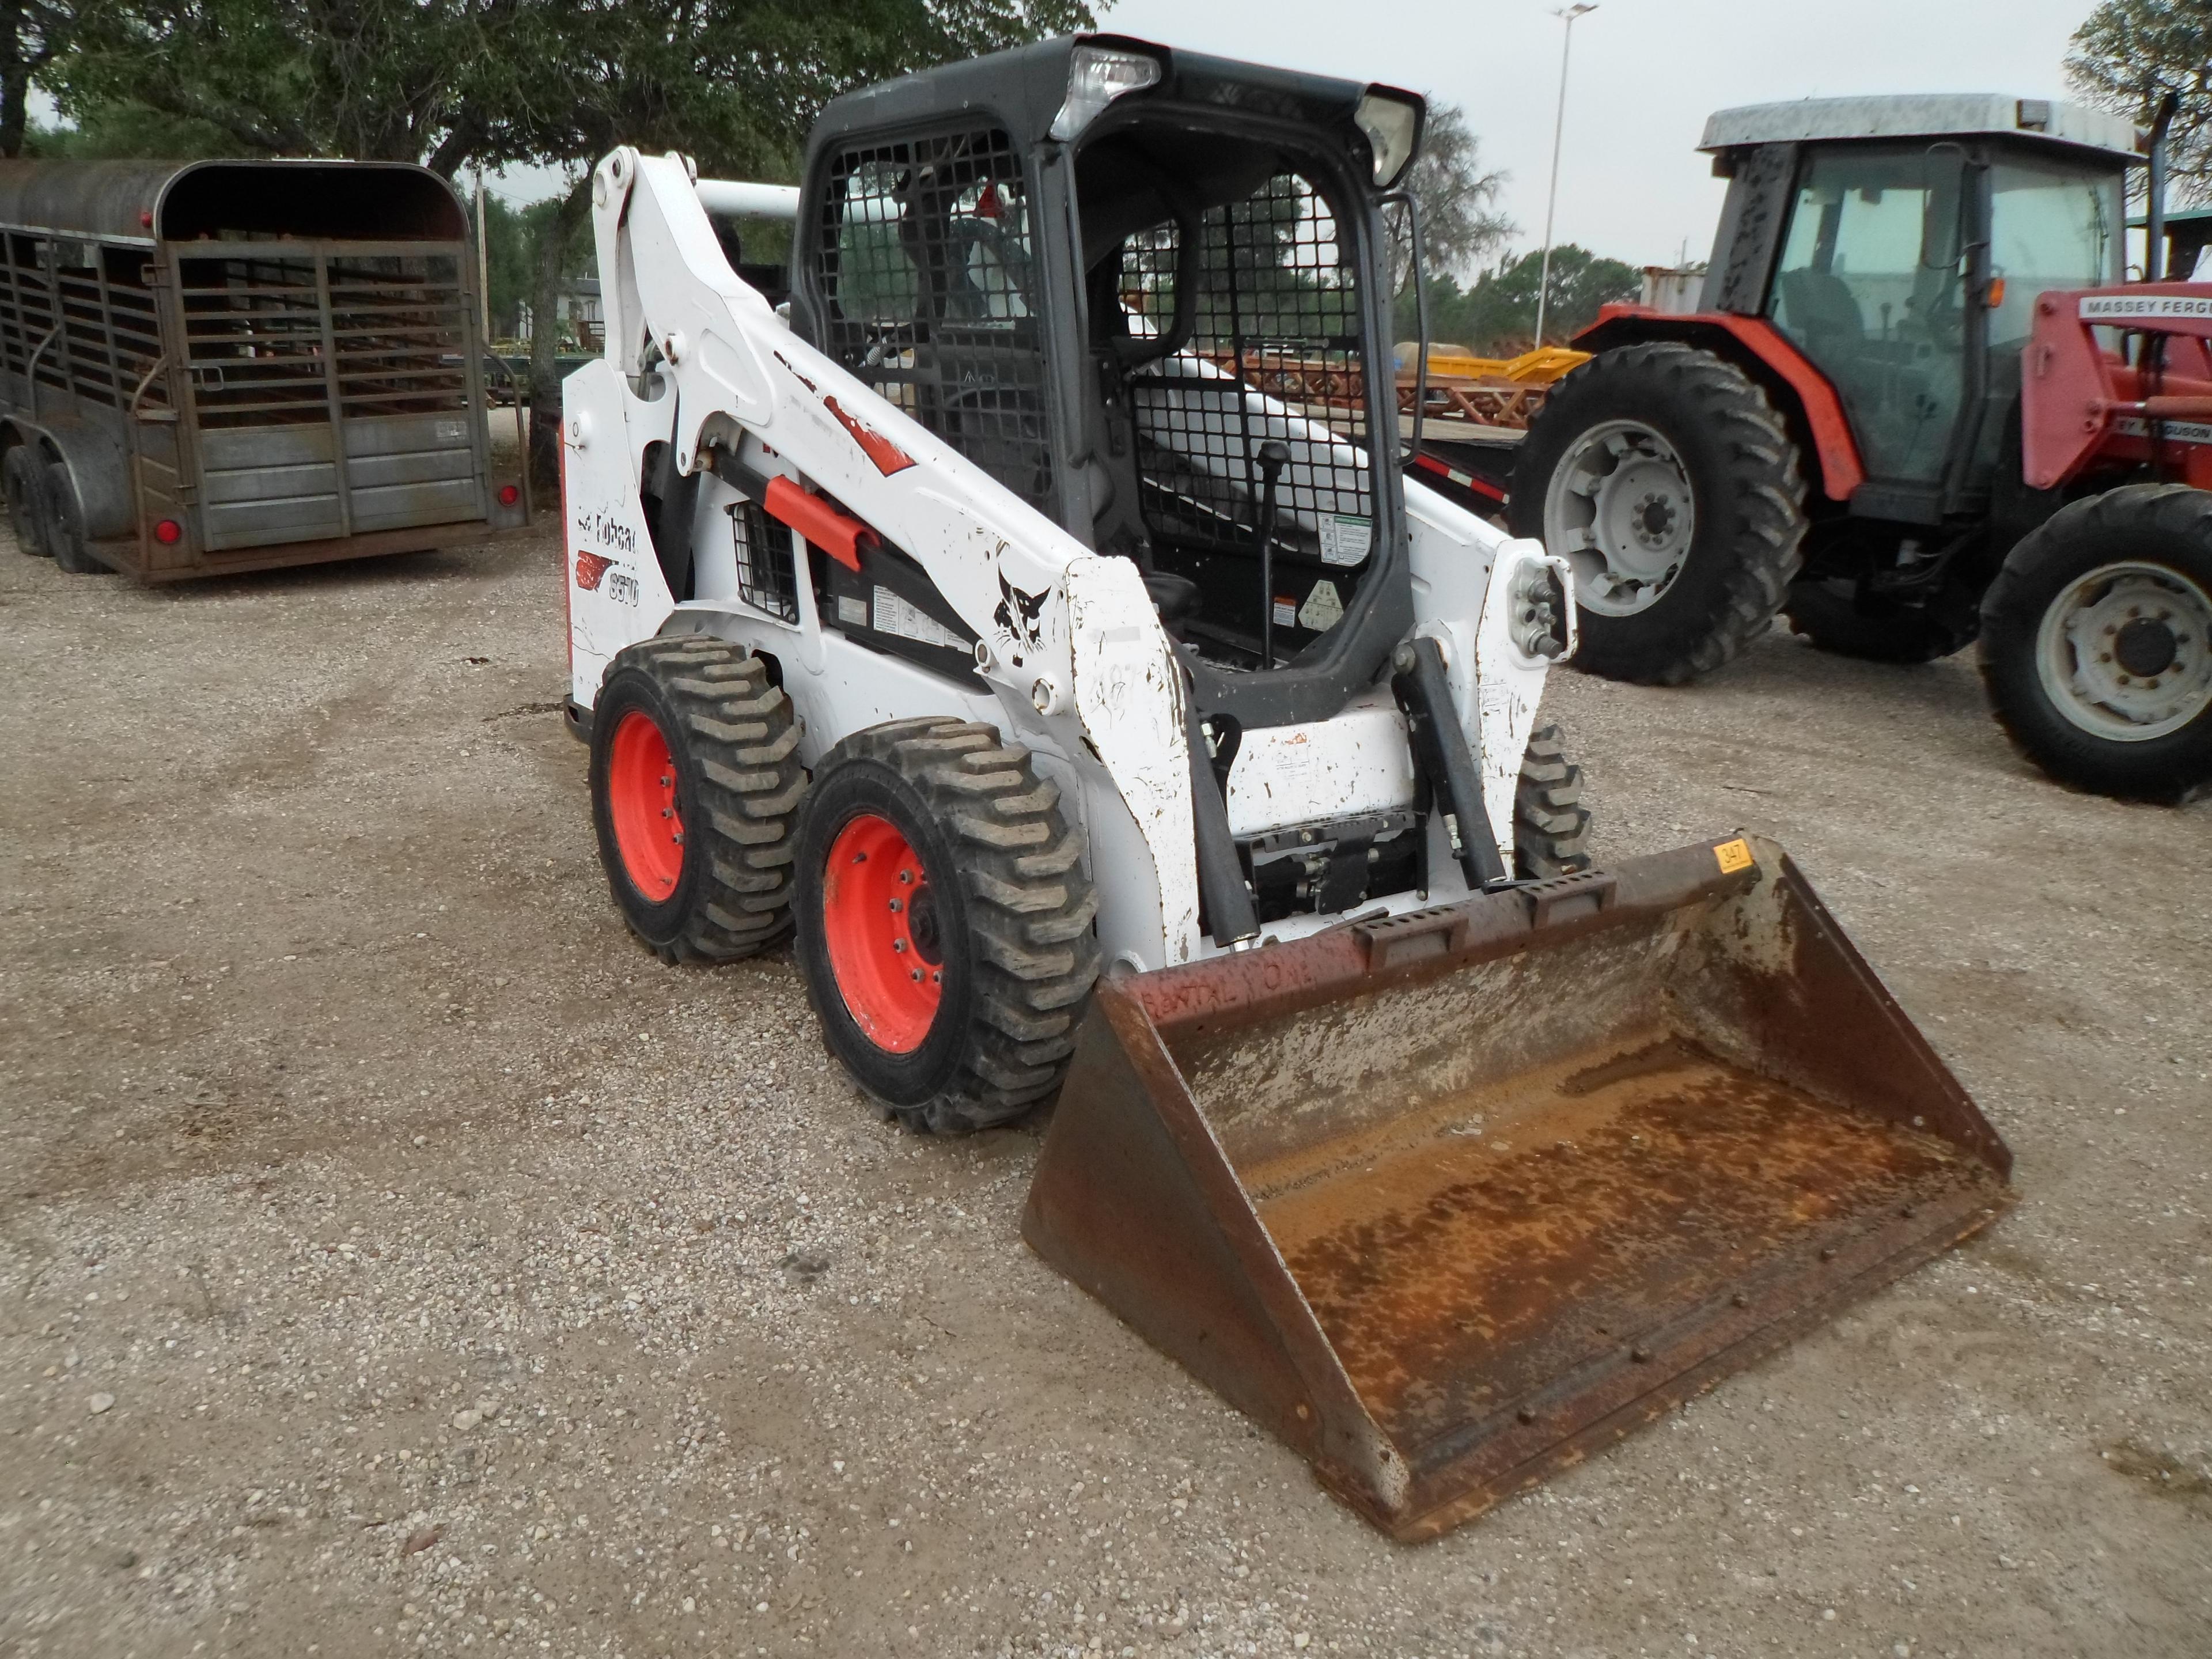 BOBCAT S570 SKID STEER (SERIAL # ALM420054) (SHOWING APPX 1,640 HOURS, UP TO THE BUYER TO DO THEIR D